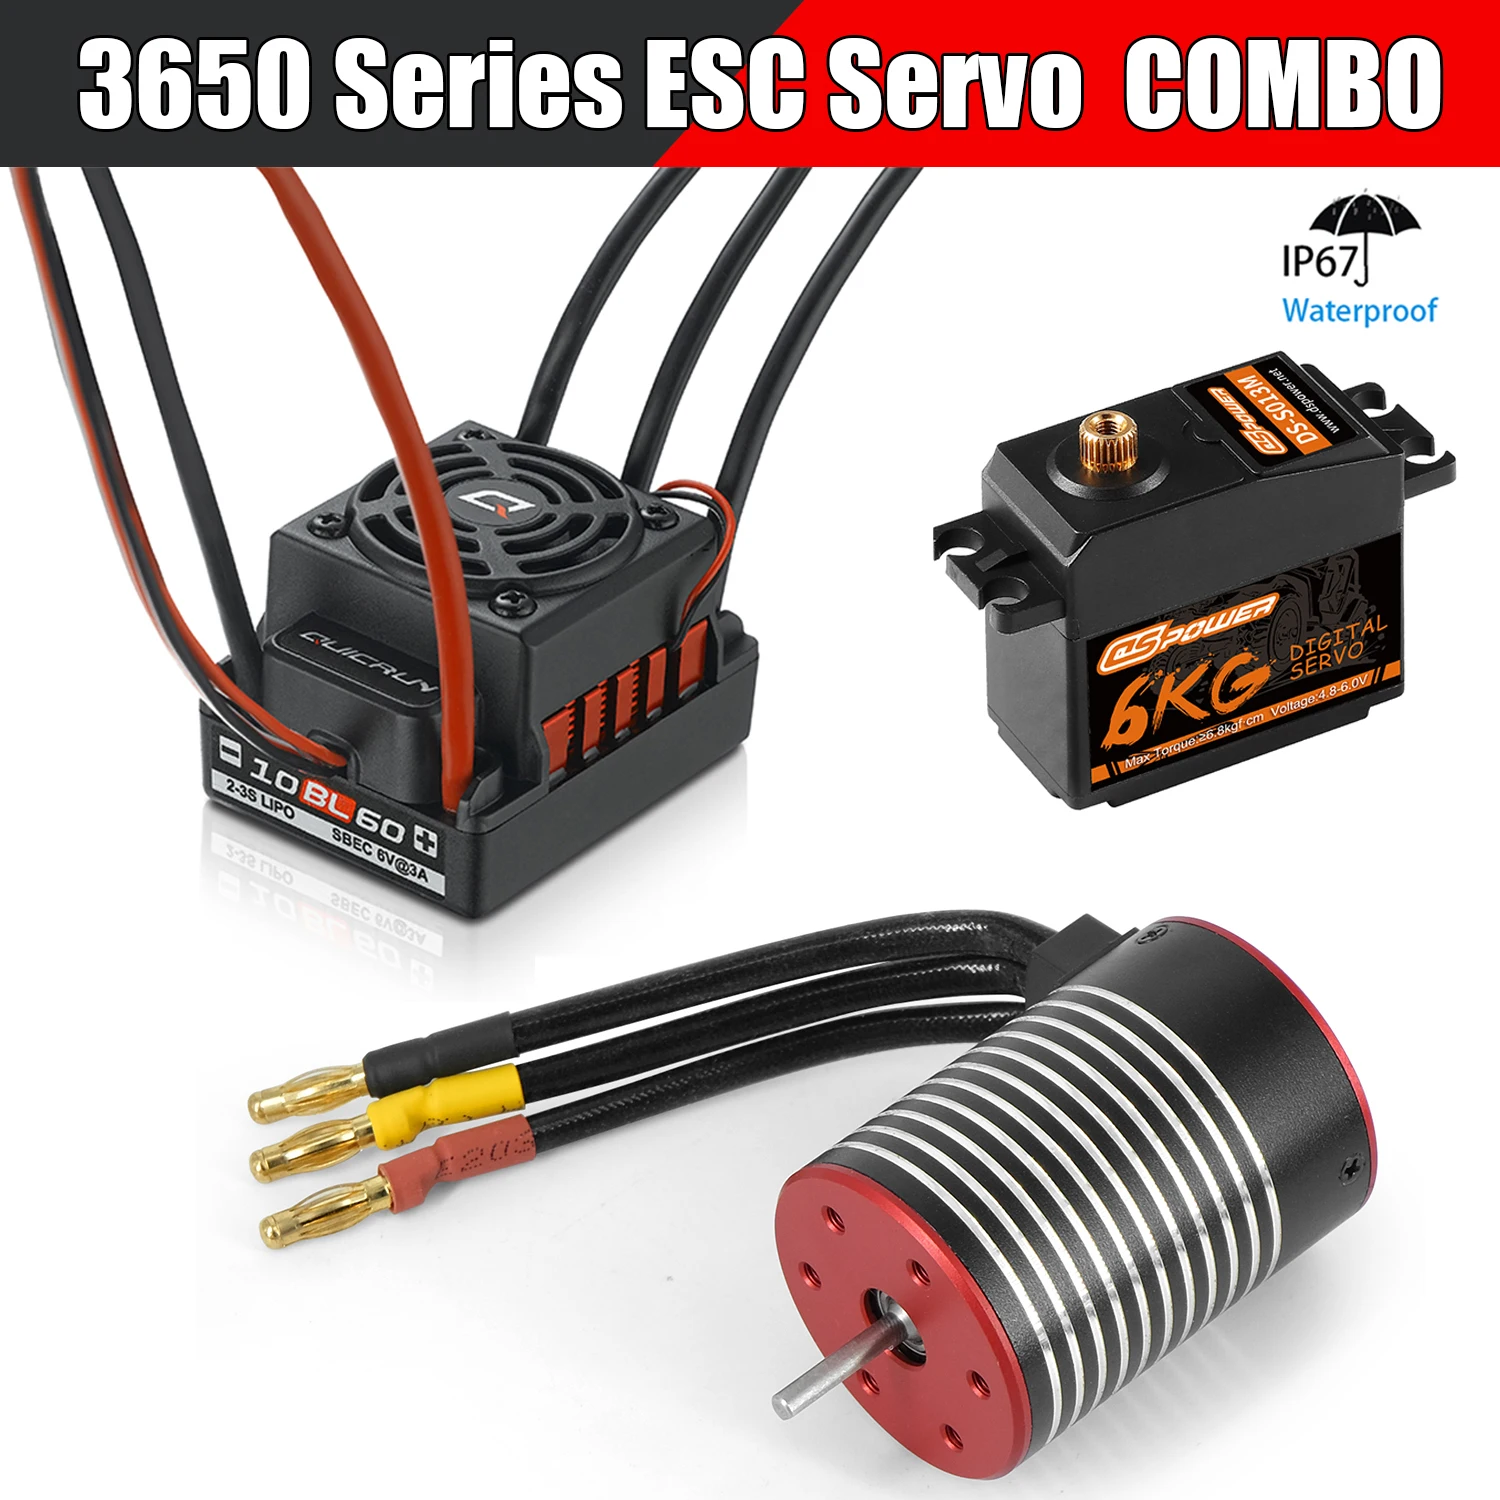 Hobby Wing 60A ESC 3650 3660 3670 Brushless Sensorless Waterproof Motor  Combo for 1/10 RC Car Axial SCX10 Traxxas Trx4 Wltoys